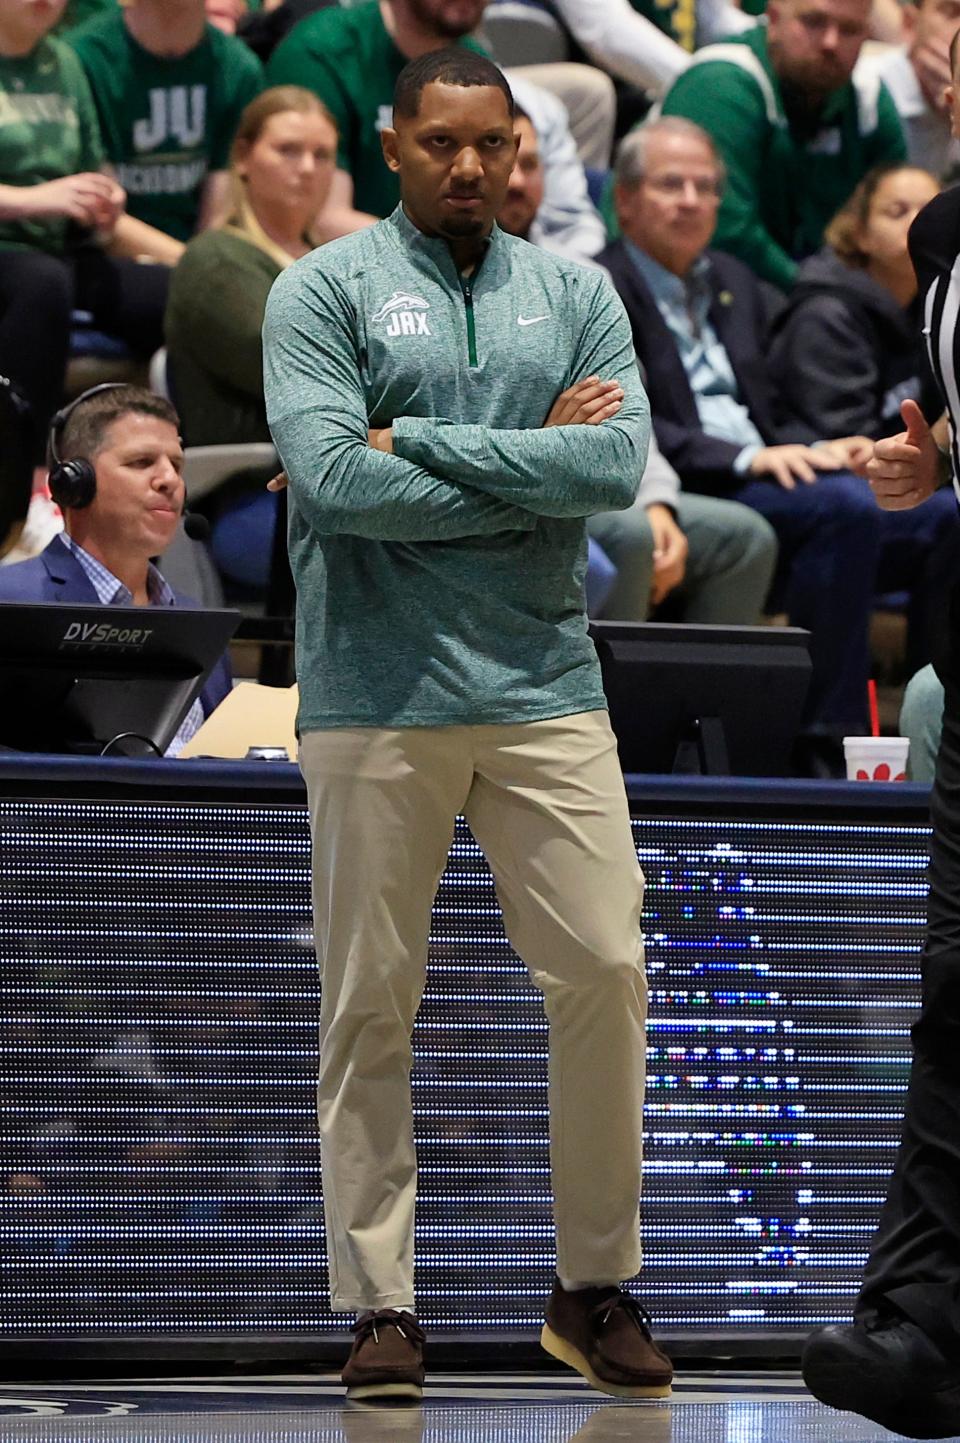 Jacksonville University basketball coach Jordan Mincy has seen the momentum for his program dip significantly the past two seasons. His Dolphins will likely have to win two of their last three home games to avoid missing the ASUN tournament for the second straight year.